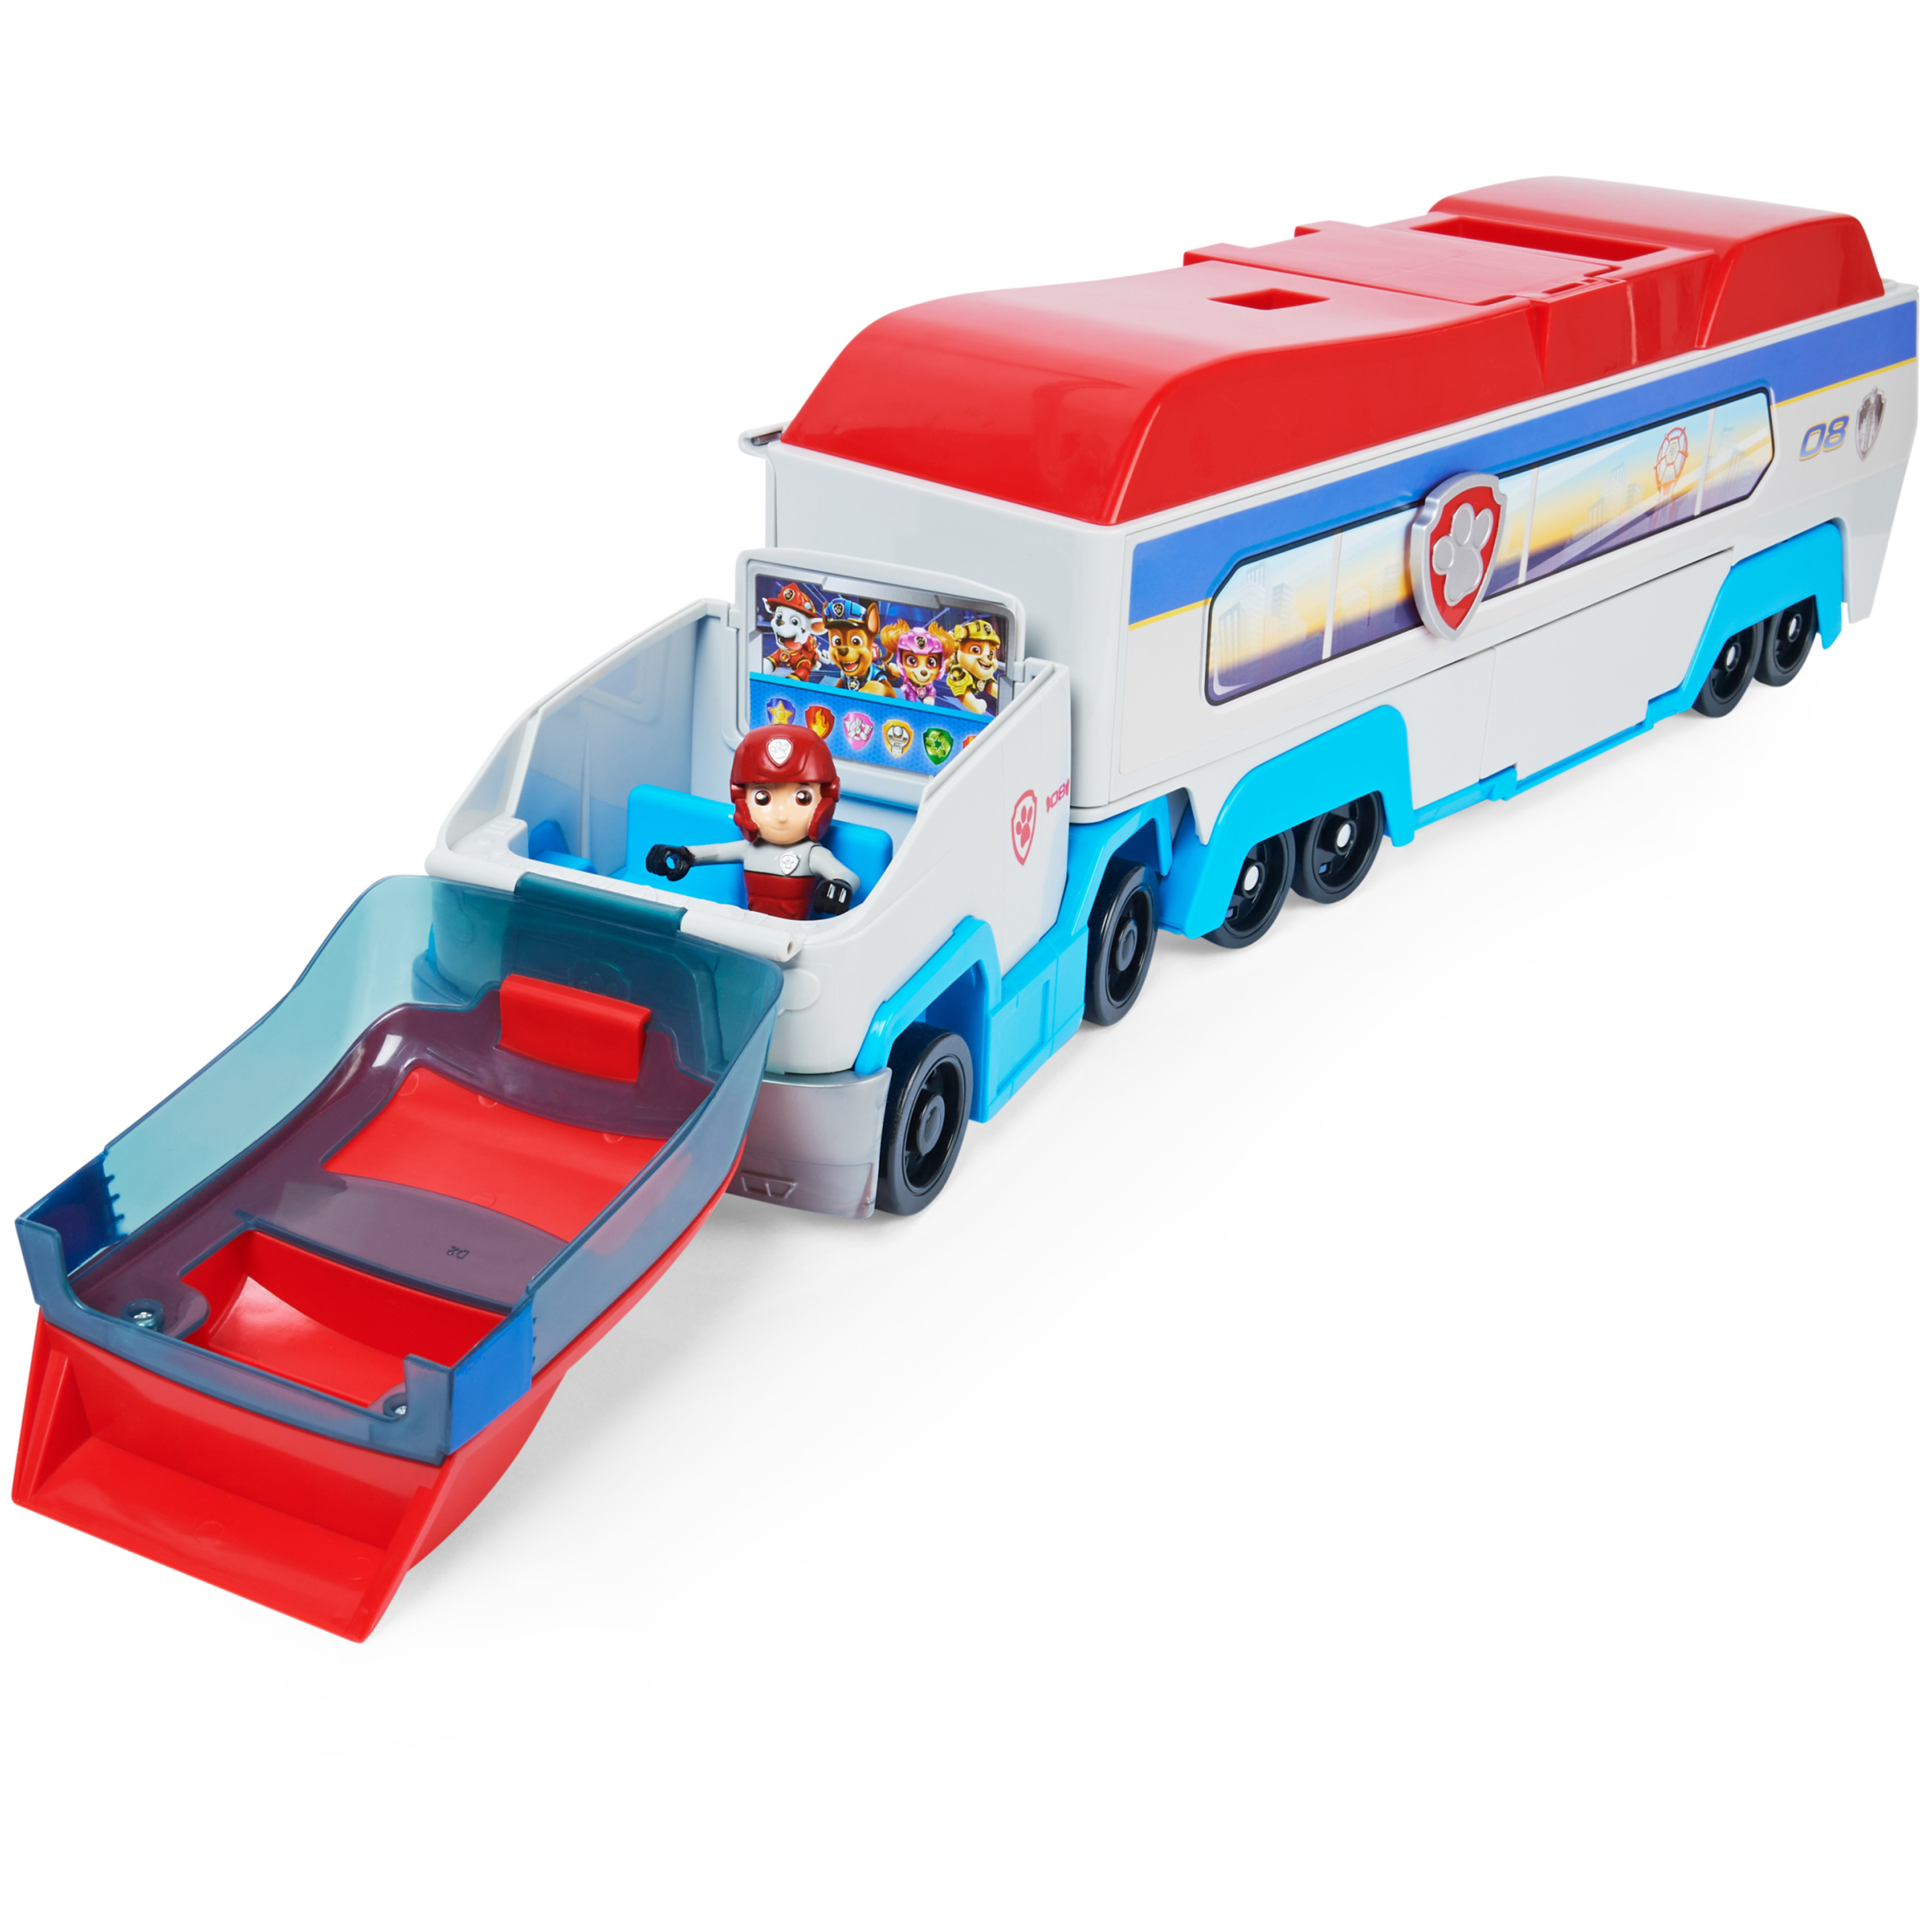 PAW Patrol, Transforming City PAW Patroller Vehicle (Walmart Exclusive), for Ages 3 and up - image 4 of 8